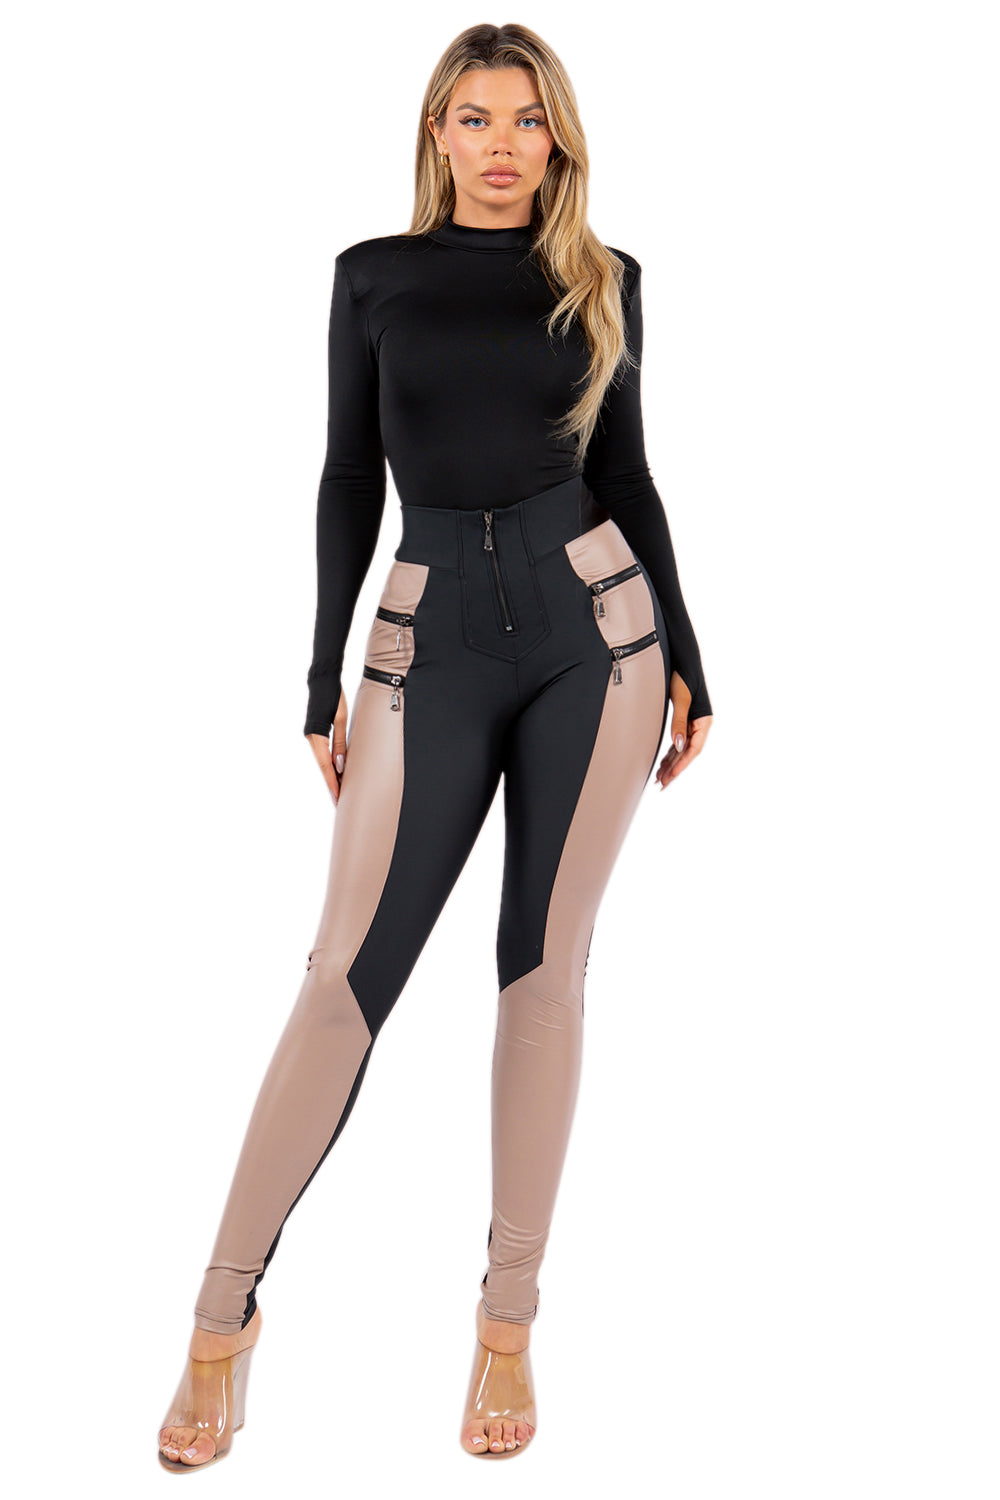 Women's Stretch Pleather Color Block Leggings with Front Zipper and Back Pockets